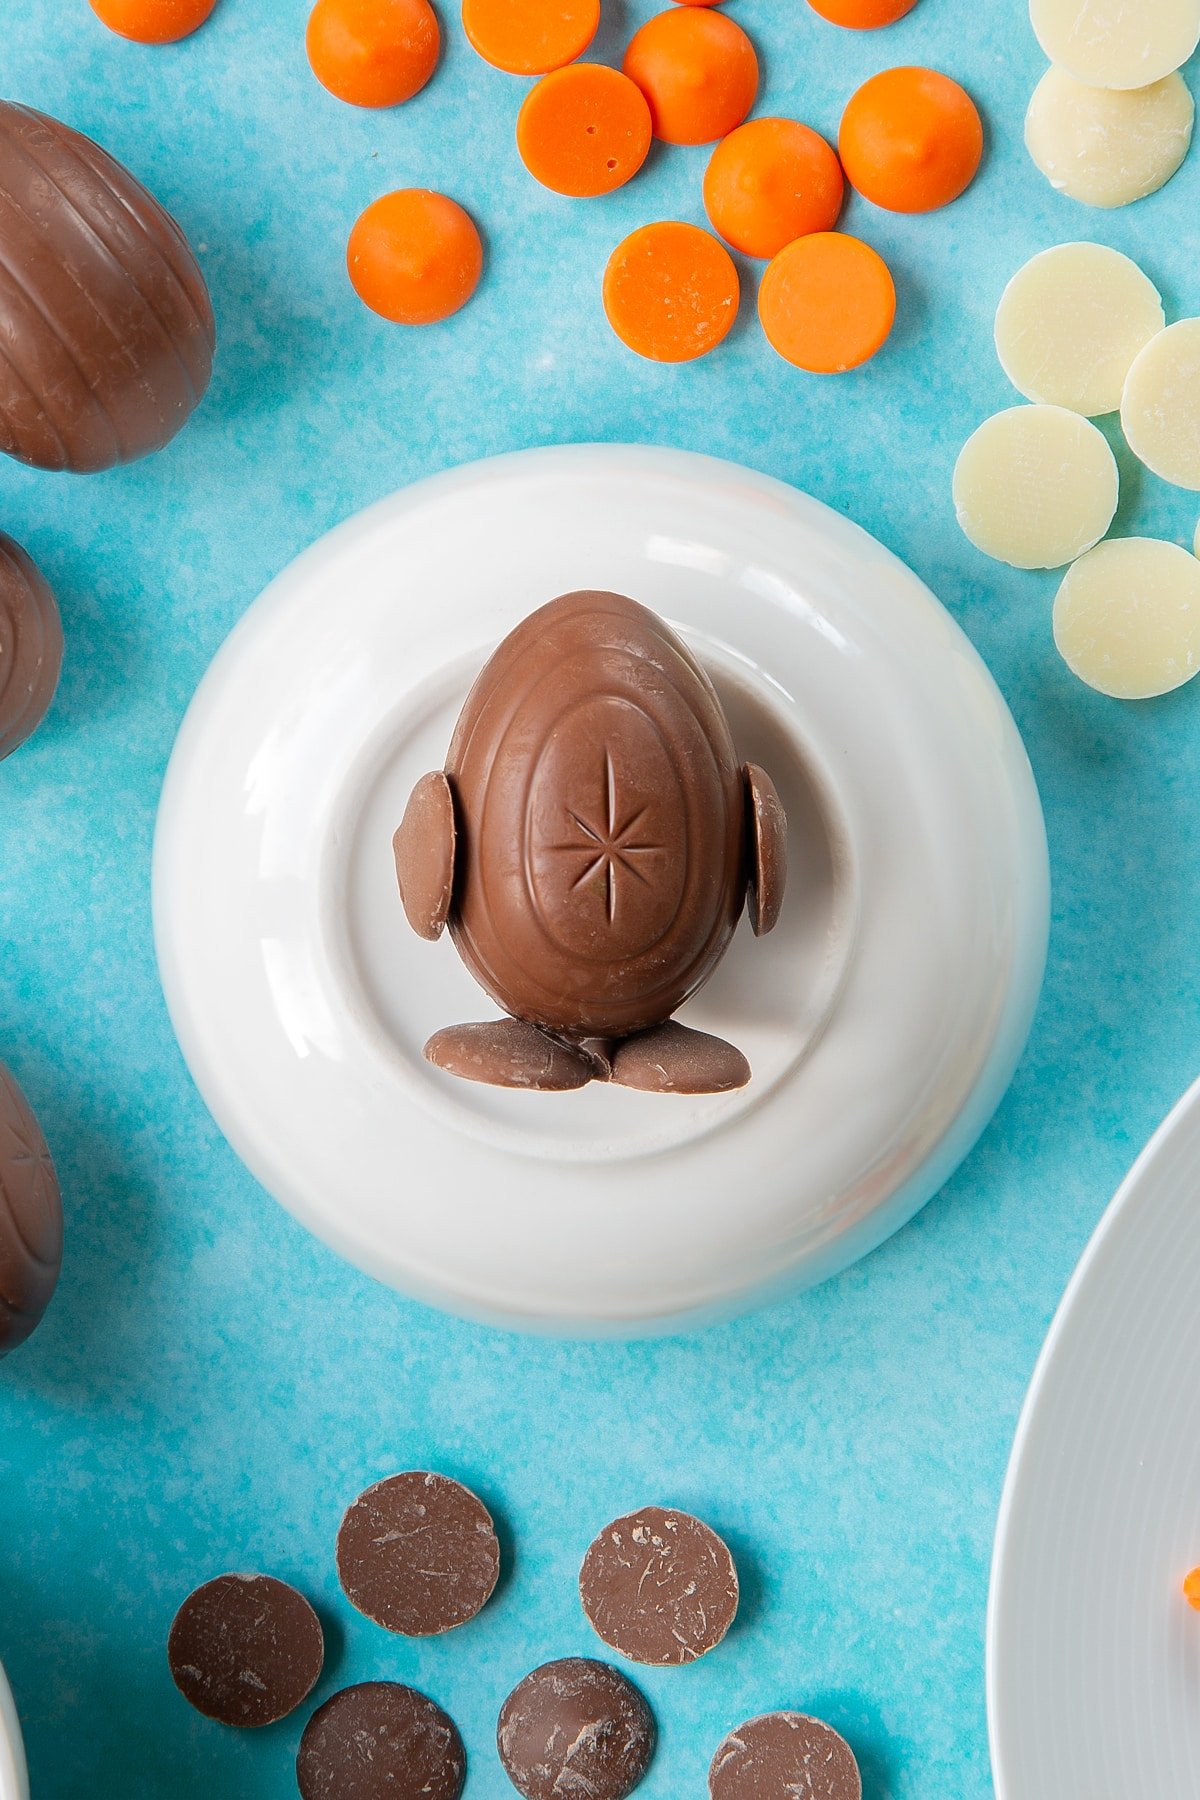 Two chocolate buttons stuck to the bottom of a creme egg to resemble feet. The egg lays on an upturned white bowl. Two more chocolate buttons are stuck to the sides of the egg to resemble wings. The bowl is surrounded by ingredients to make chocolate chicks.